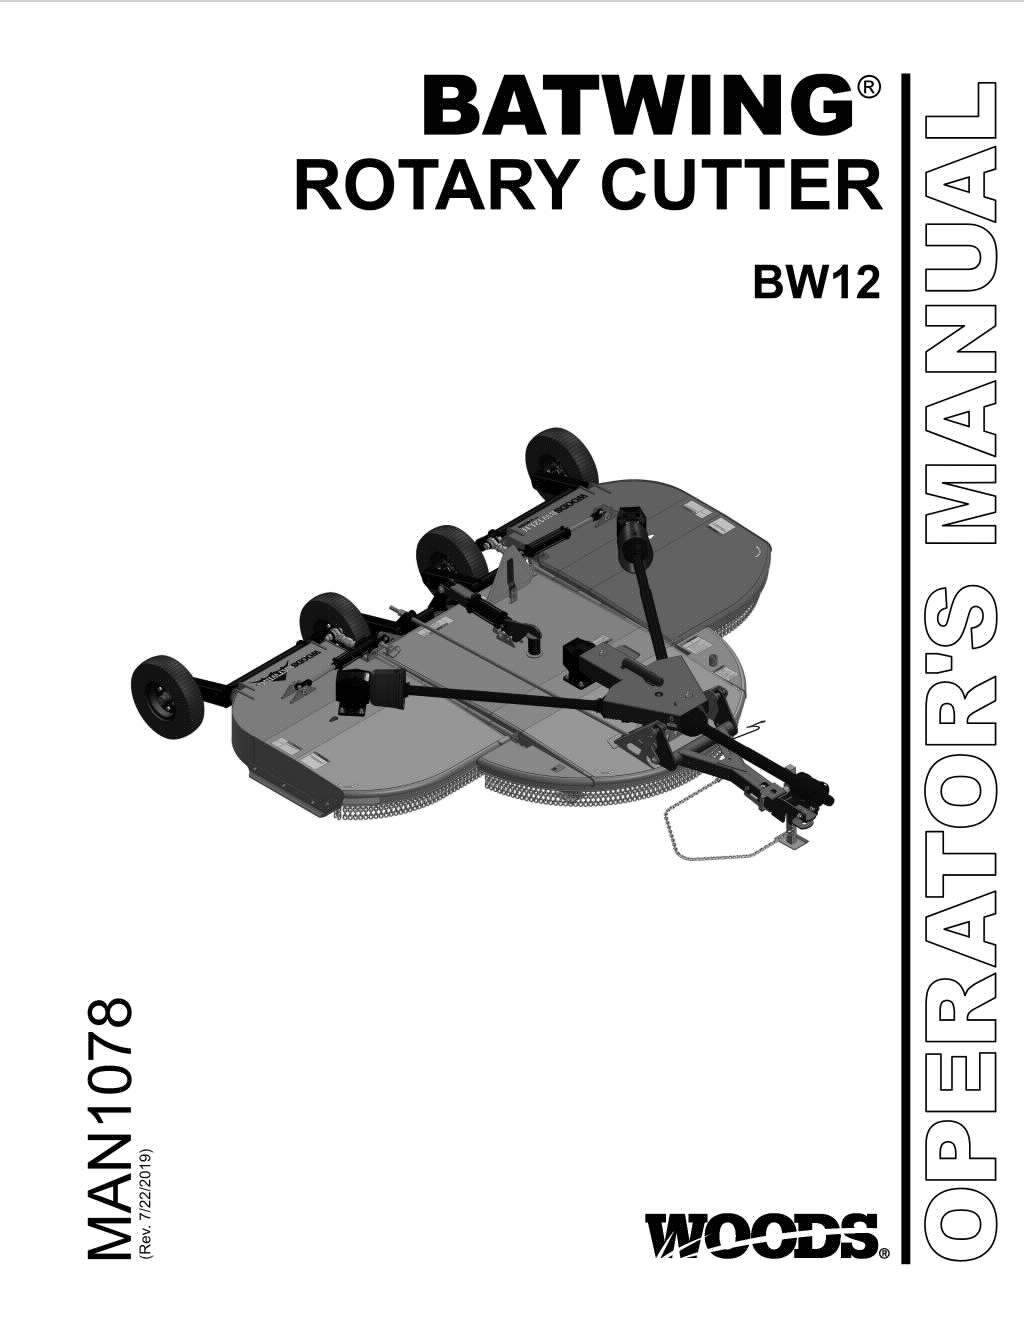 The Rotary Cutter MANUAL